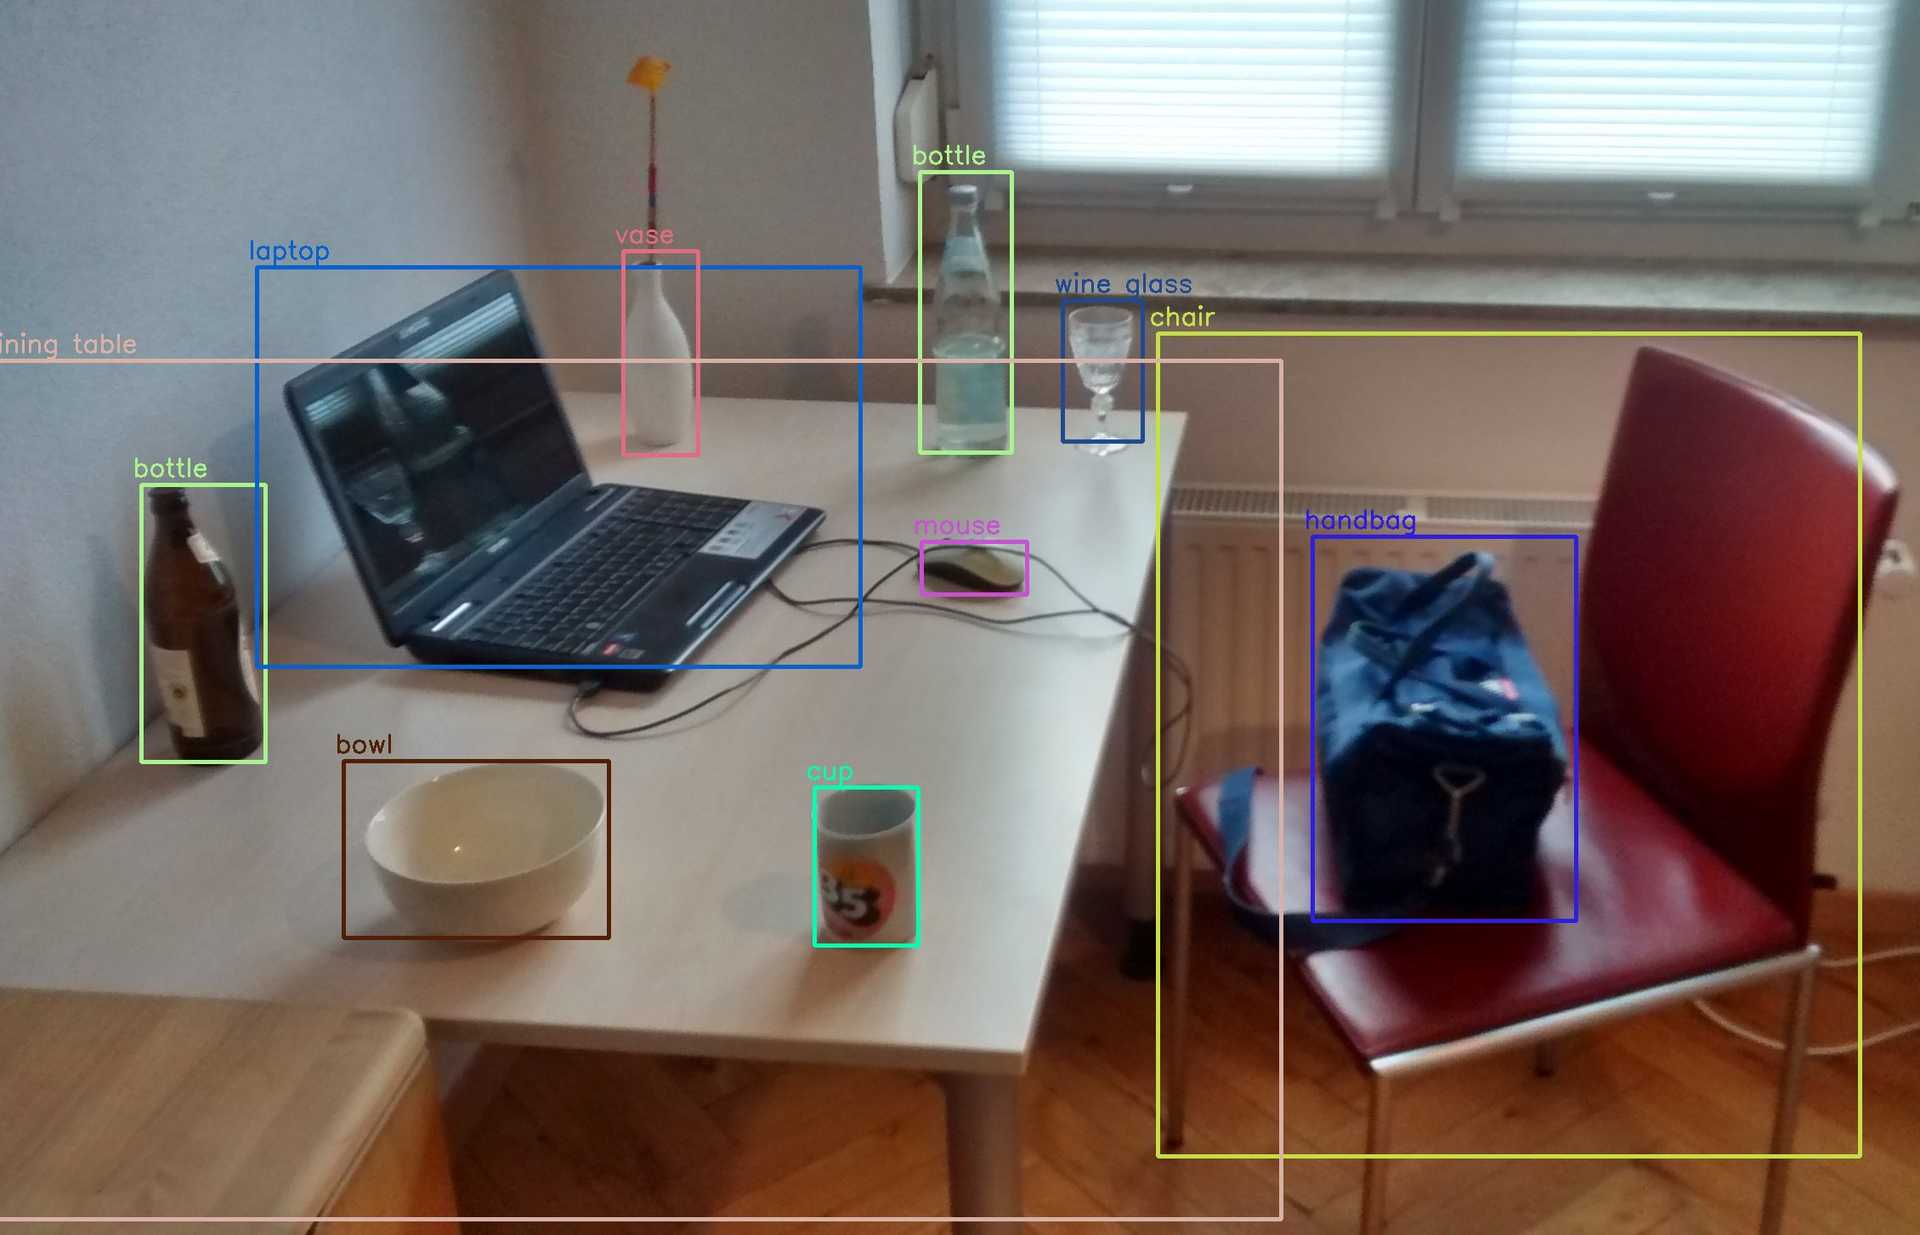 Object Recognition In Any Background Using OpenCV Python